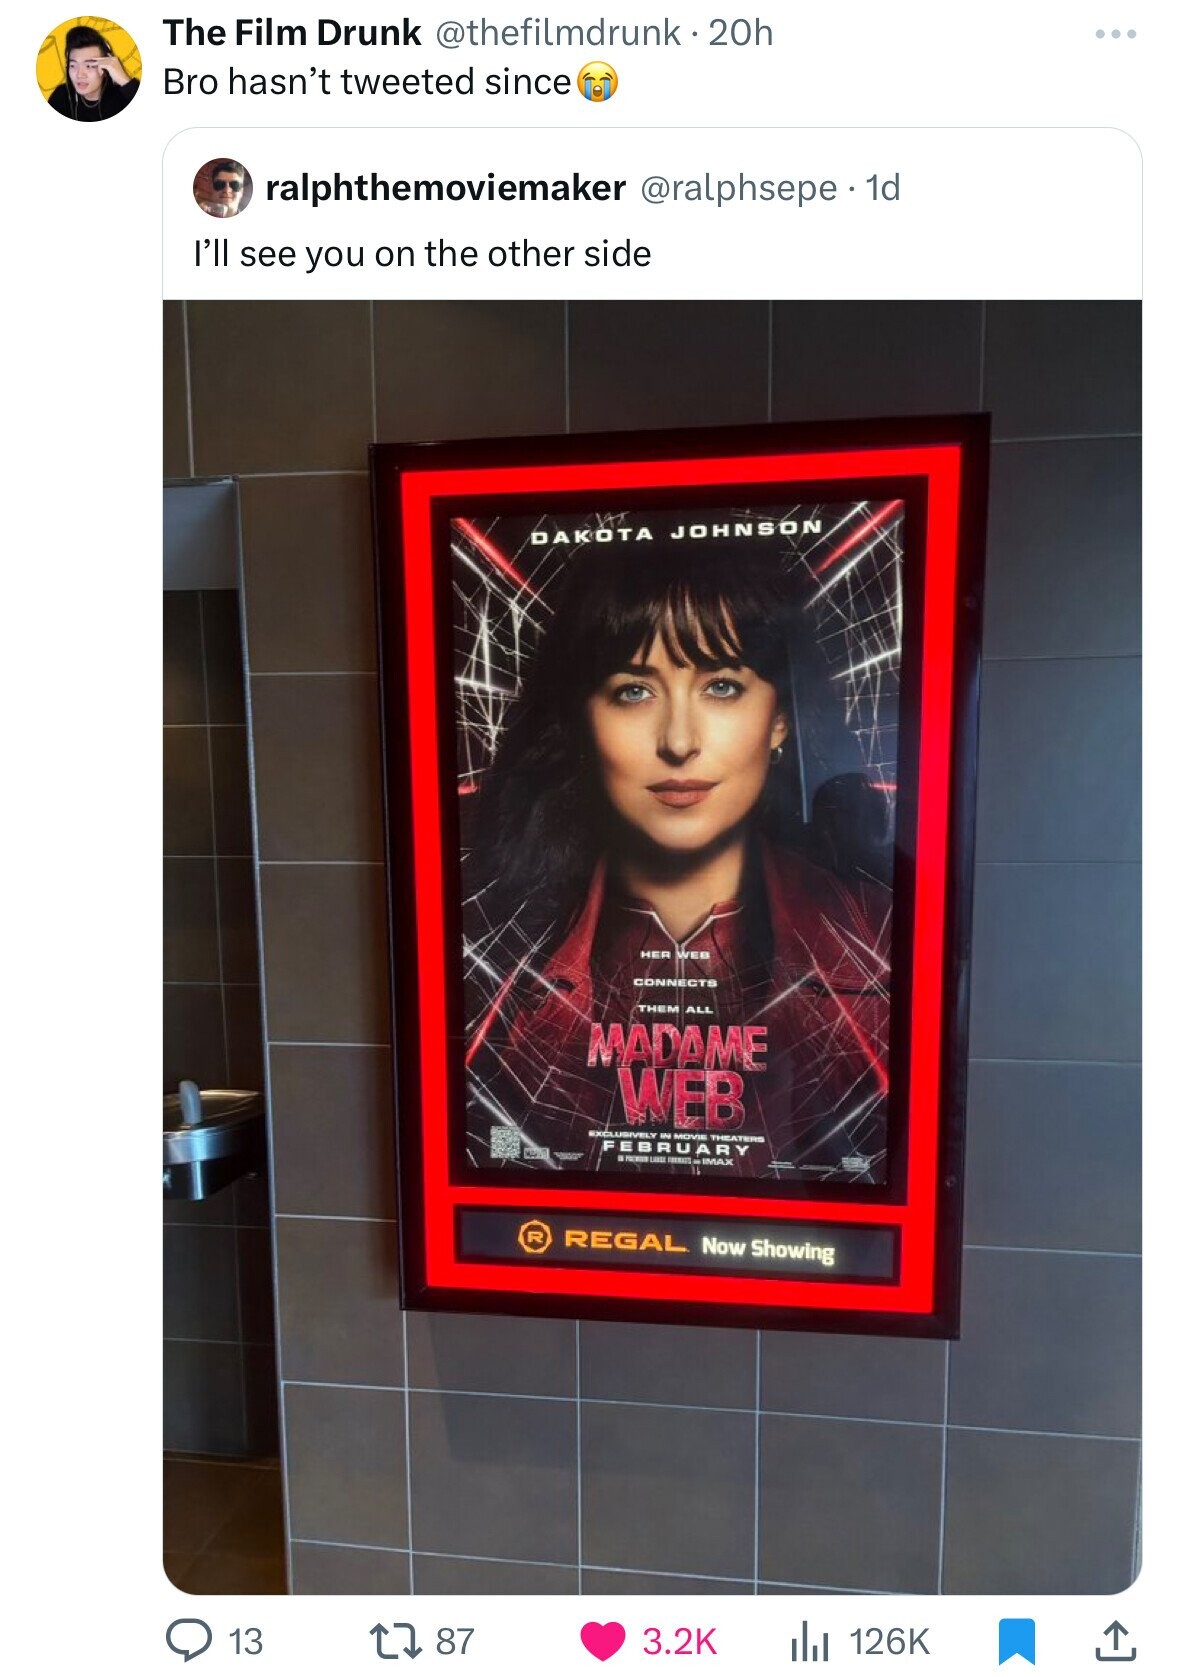 poster - The Film Drunk 20h Bro hasn't tweeted since ralphthemoviemaker . 1d I'll see you on the other side 13 187 Cvt Dakota Johnson Her Web Connects Them All Madame Web Exclusively In Movie Theaters February Labe Imax Regal Now Showing il ...